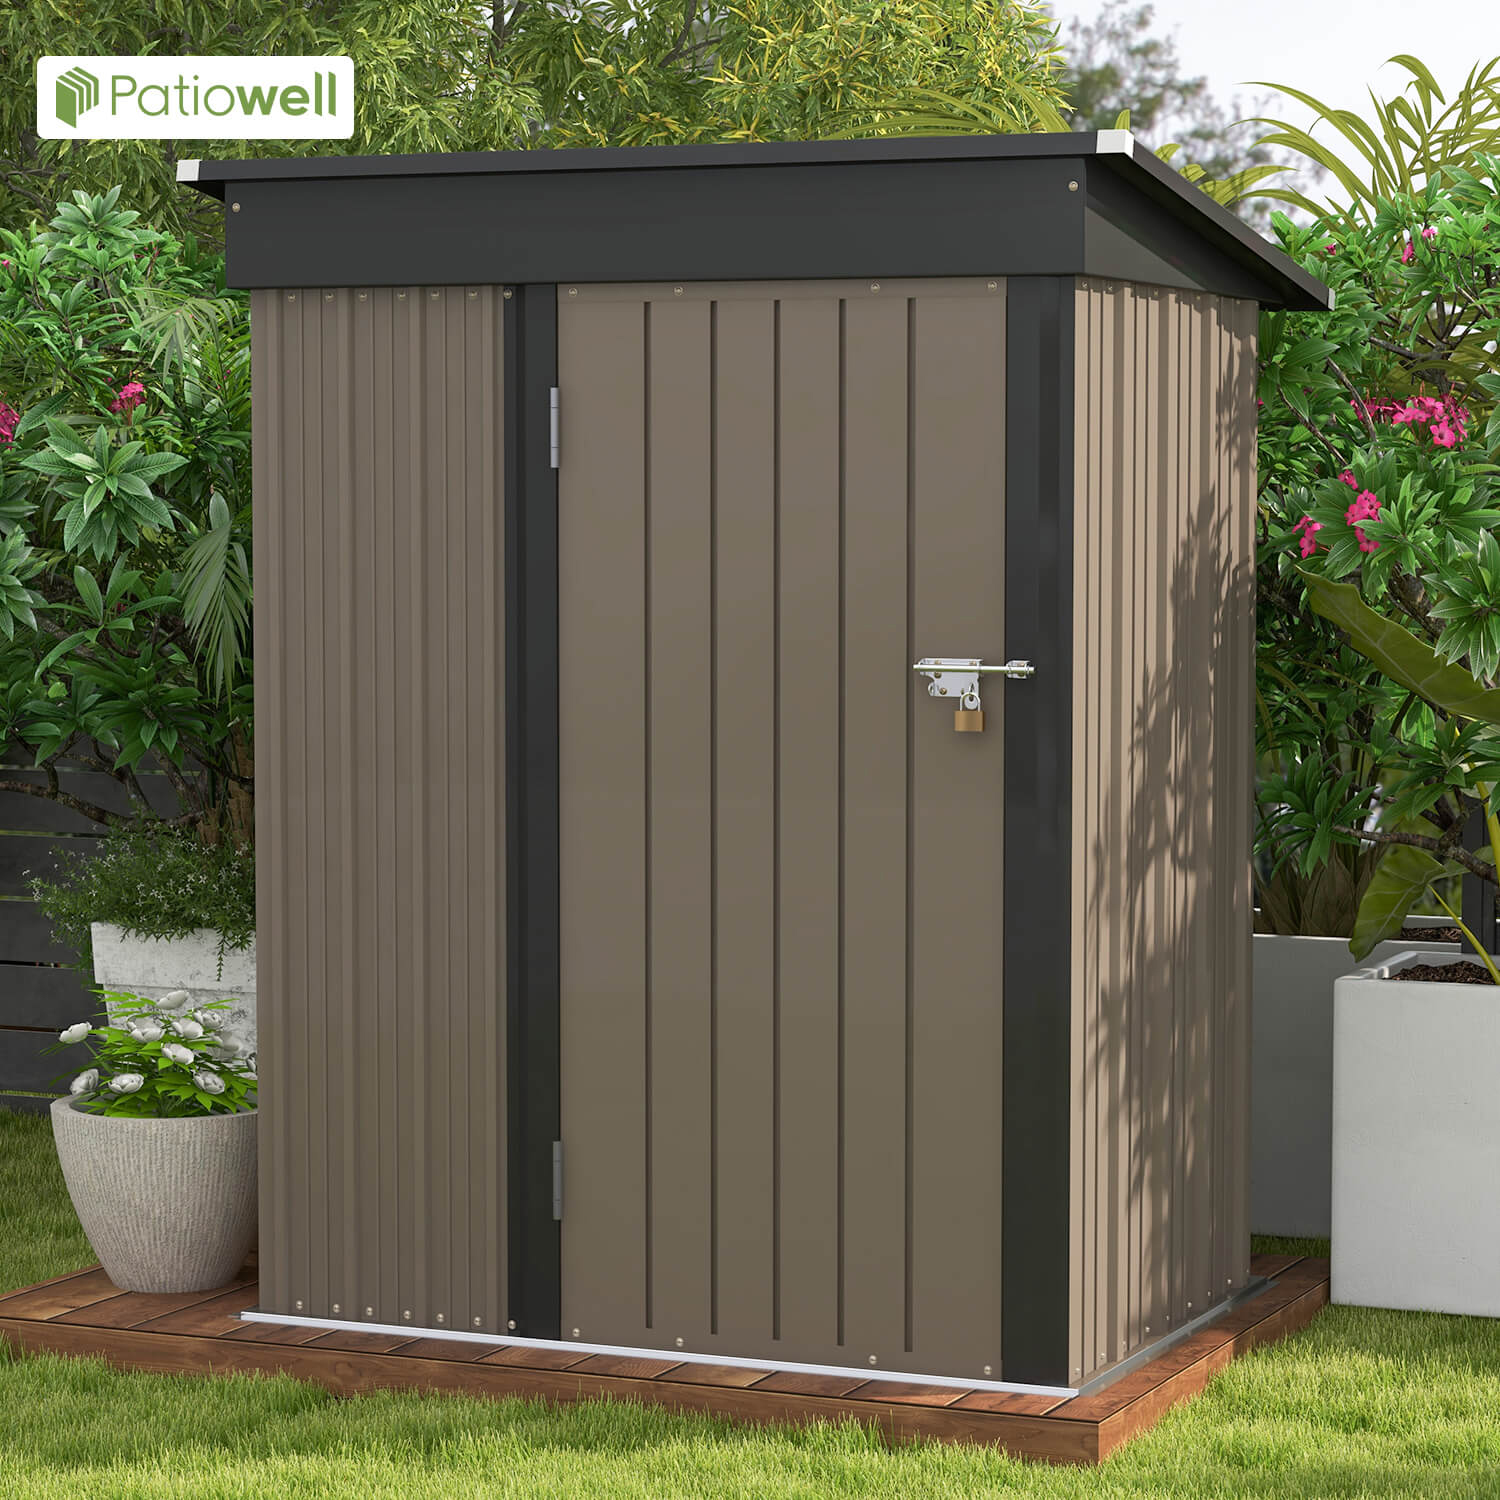 Patiowell Classic 5' x 3' Outdoor Storage Shed Metal Shed with Sloping Roof and Lockable Door, Brown - image 5 of 13